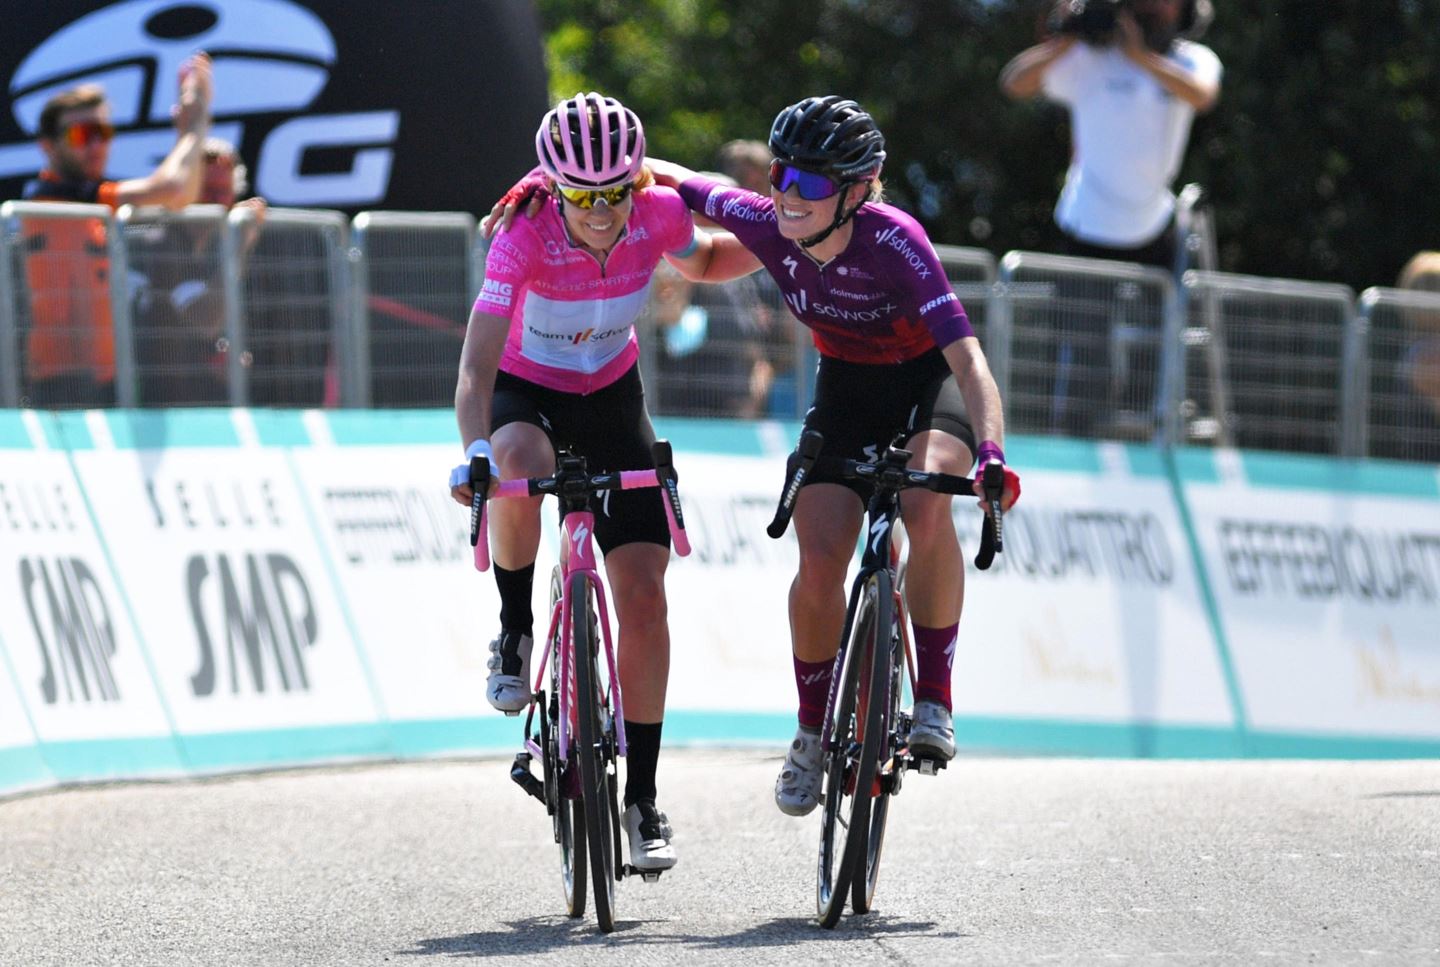 Anna van der Breggen and Demi Vollering as teammates on Team SD Worx crossing the finish line togather.